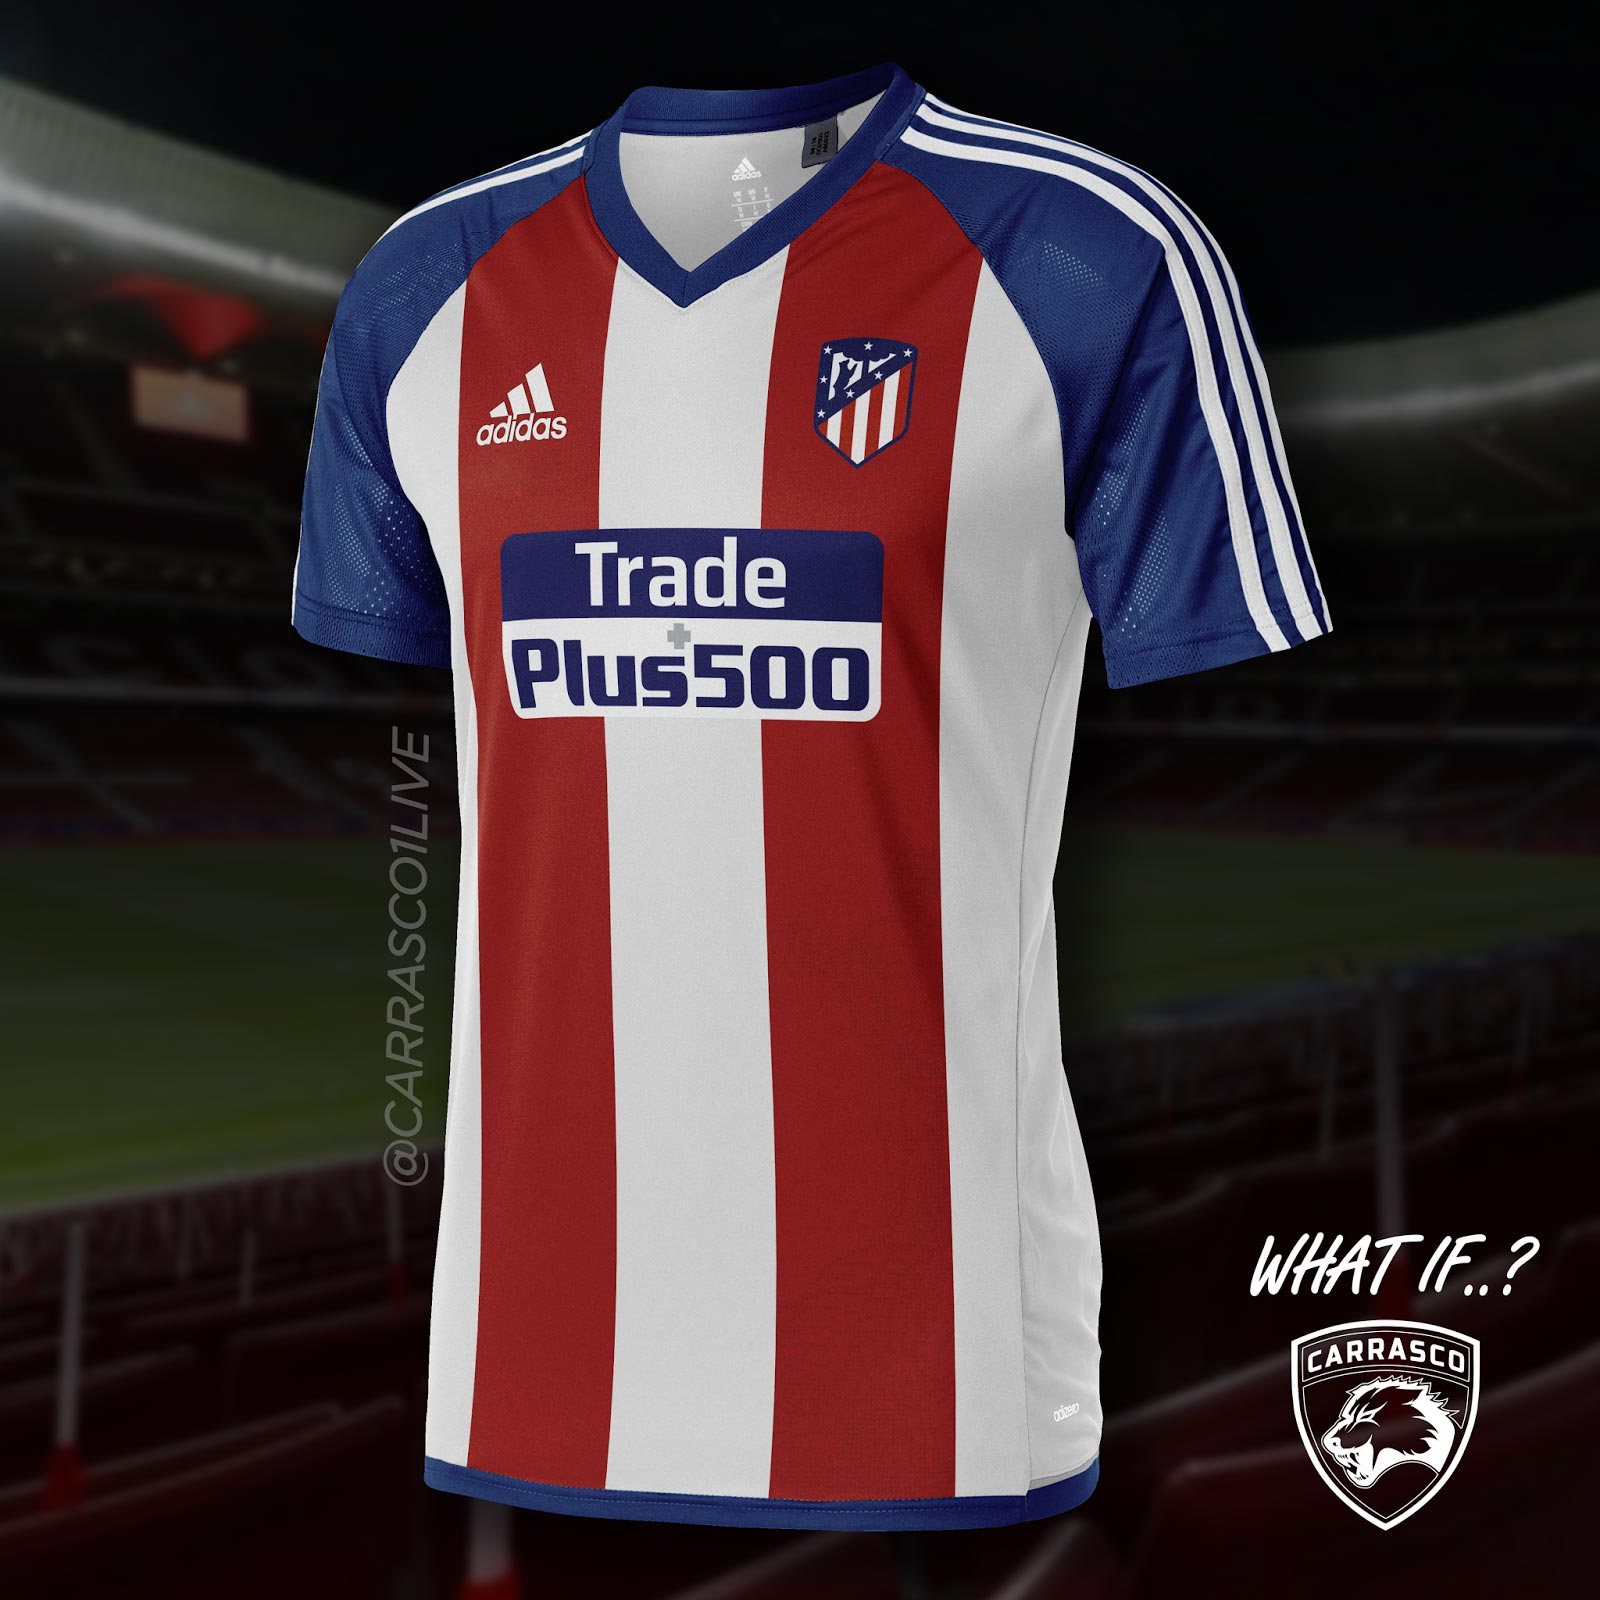 What If? Adidas FC Barcelona, Atlético Madrid & Malaga Concept Kits by Carrasco - Footy